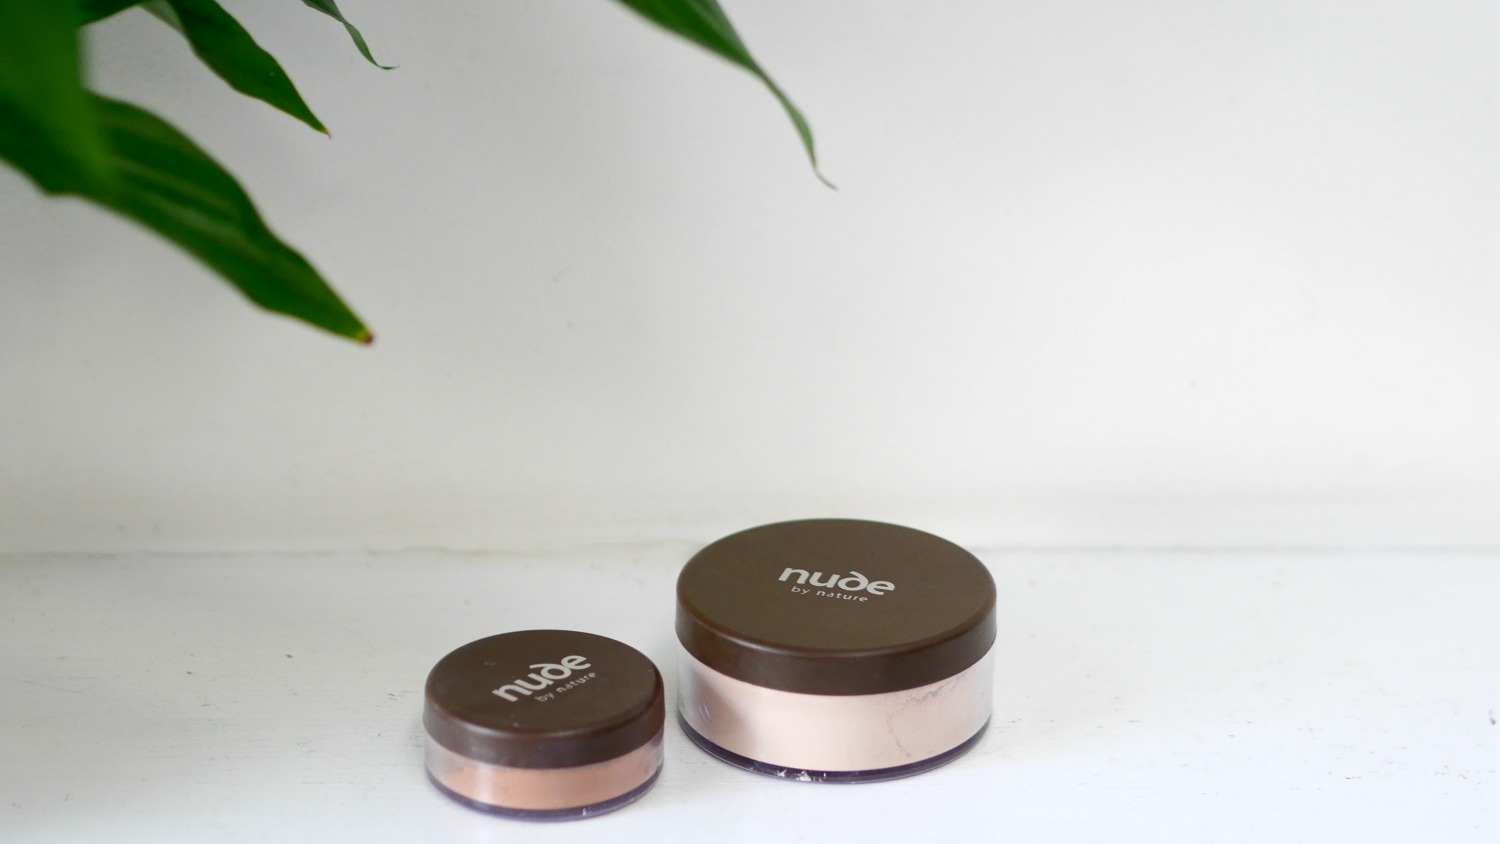 Nude by Nature - Eczema Makeup - The Eczema Store